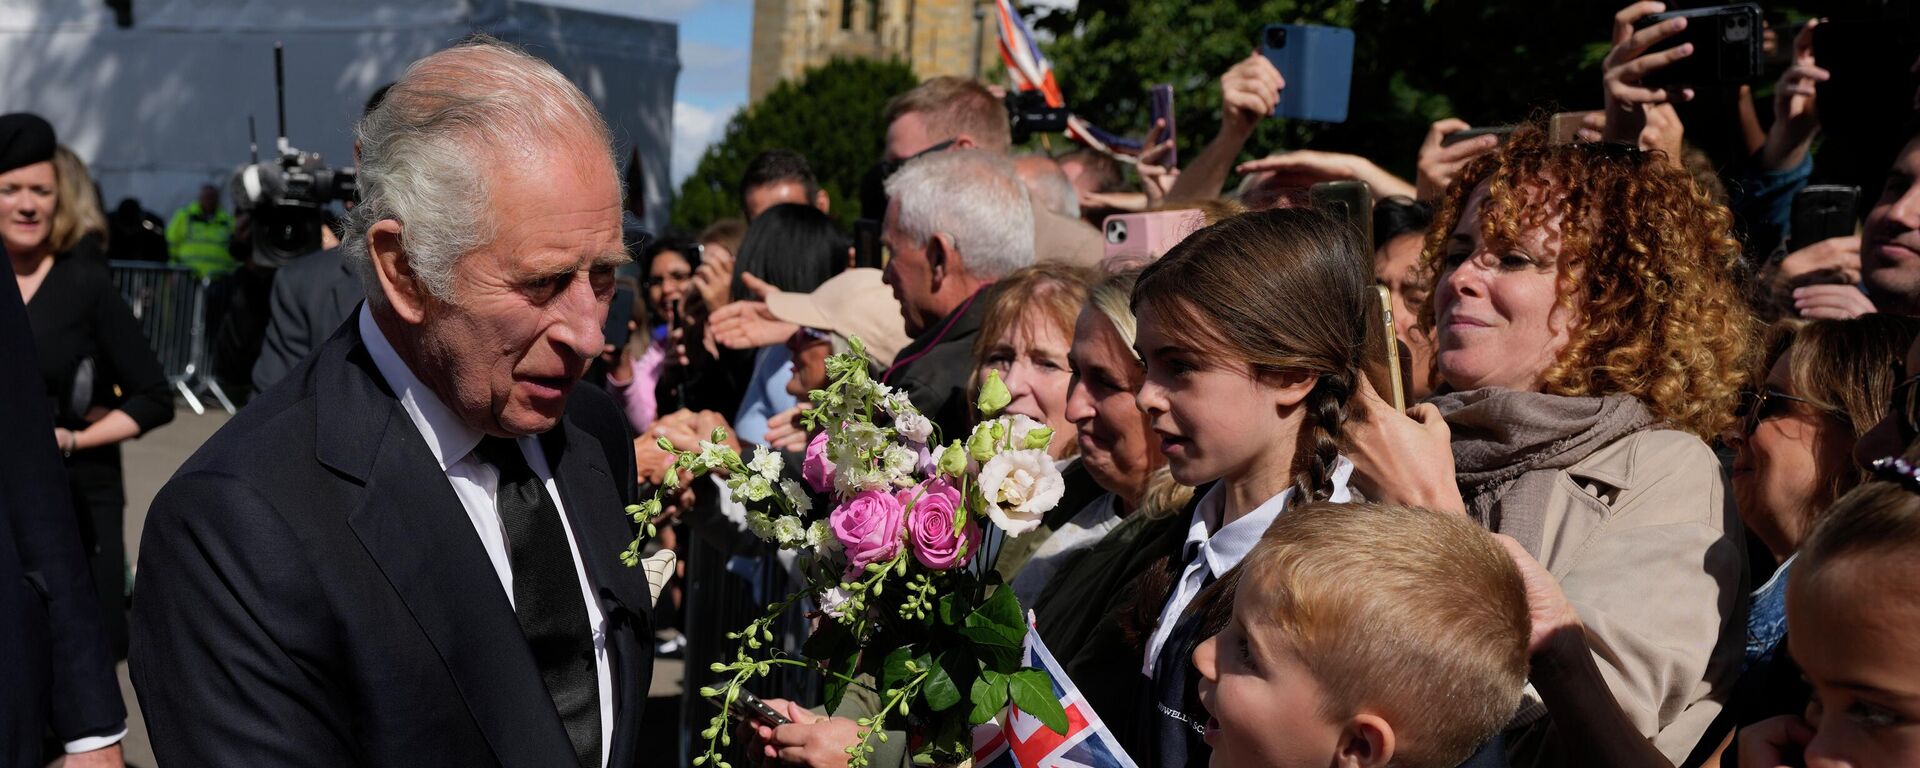 Britain's King Charles III shakes hands with a boy after a Service of Prayer and Reflection for the life of Queen Elizabeth II, at Llandaff Cathedral in Cardiff, Wales, Friday Sept. 16, 2022. The Royal couple has have arrived in Wales for an official visit. The royal couple previously visited to Scotland and Northern Ireland, the other nations making up the United Kingdom, following the death of Queen Elizabeth II at age 96 on Thursday, Sept. 8. (AP Photo/Frank Augstein, Pool) - Sputnik International, 1920, 07.12.2022